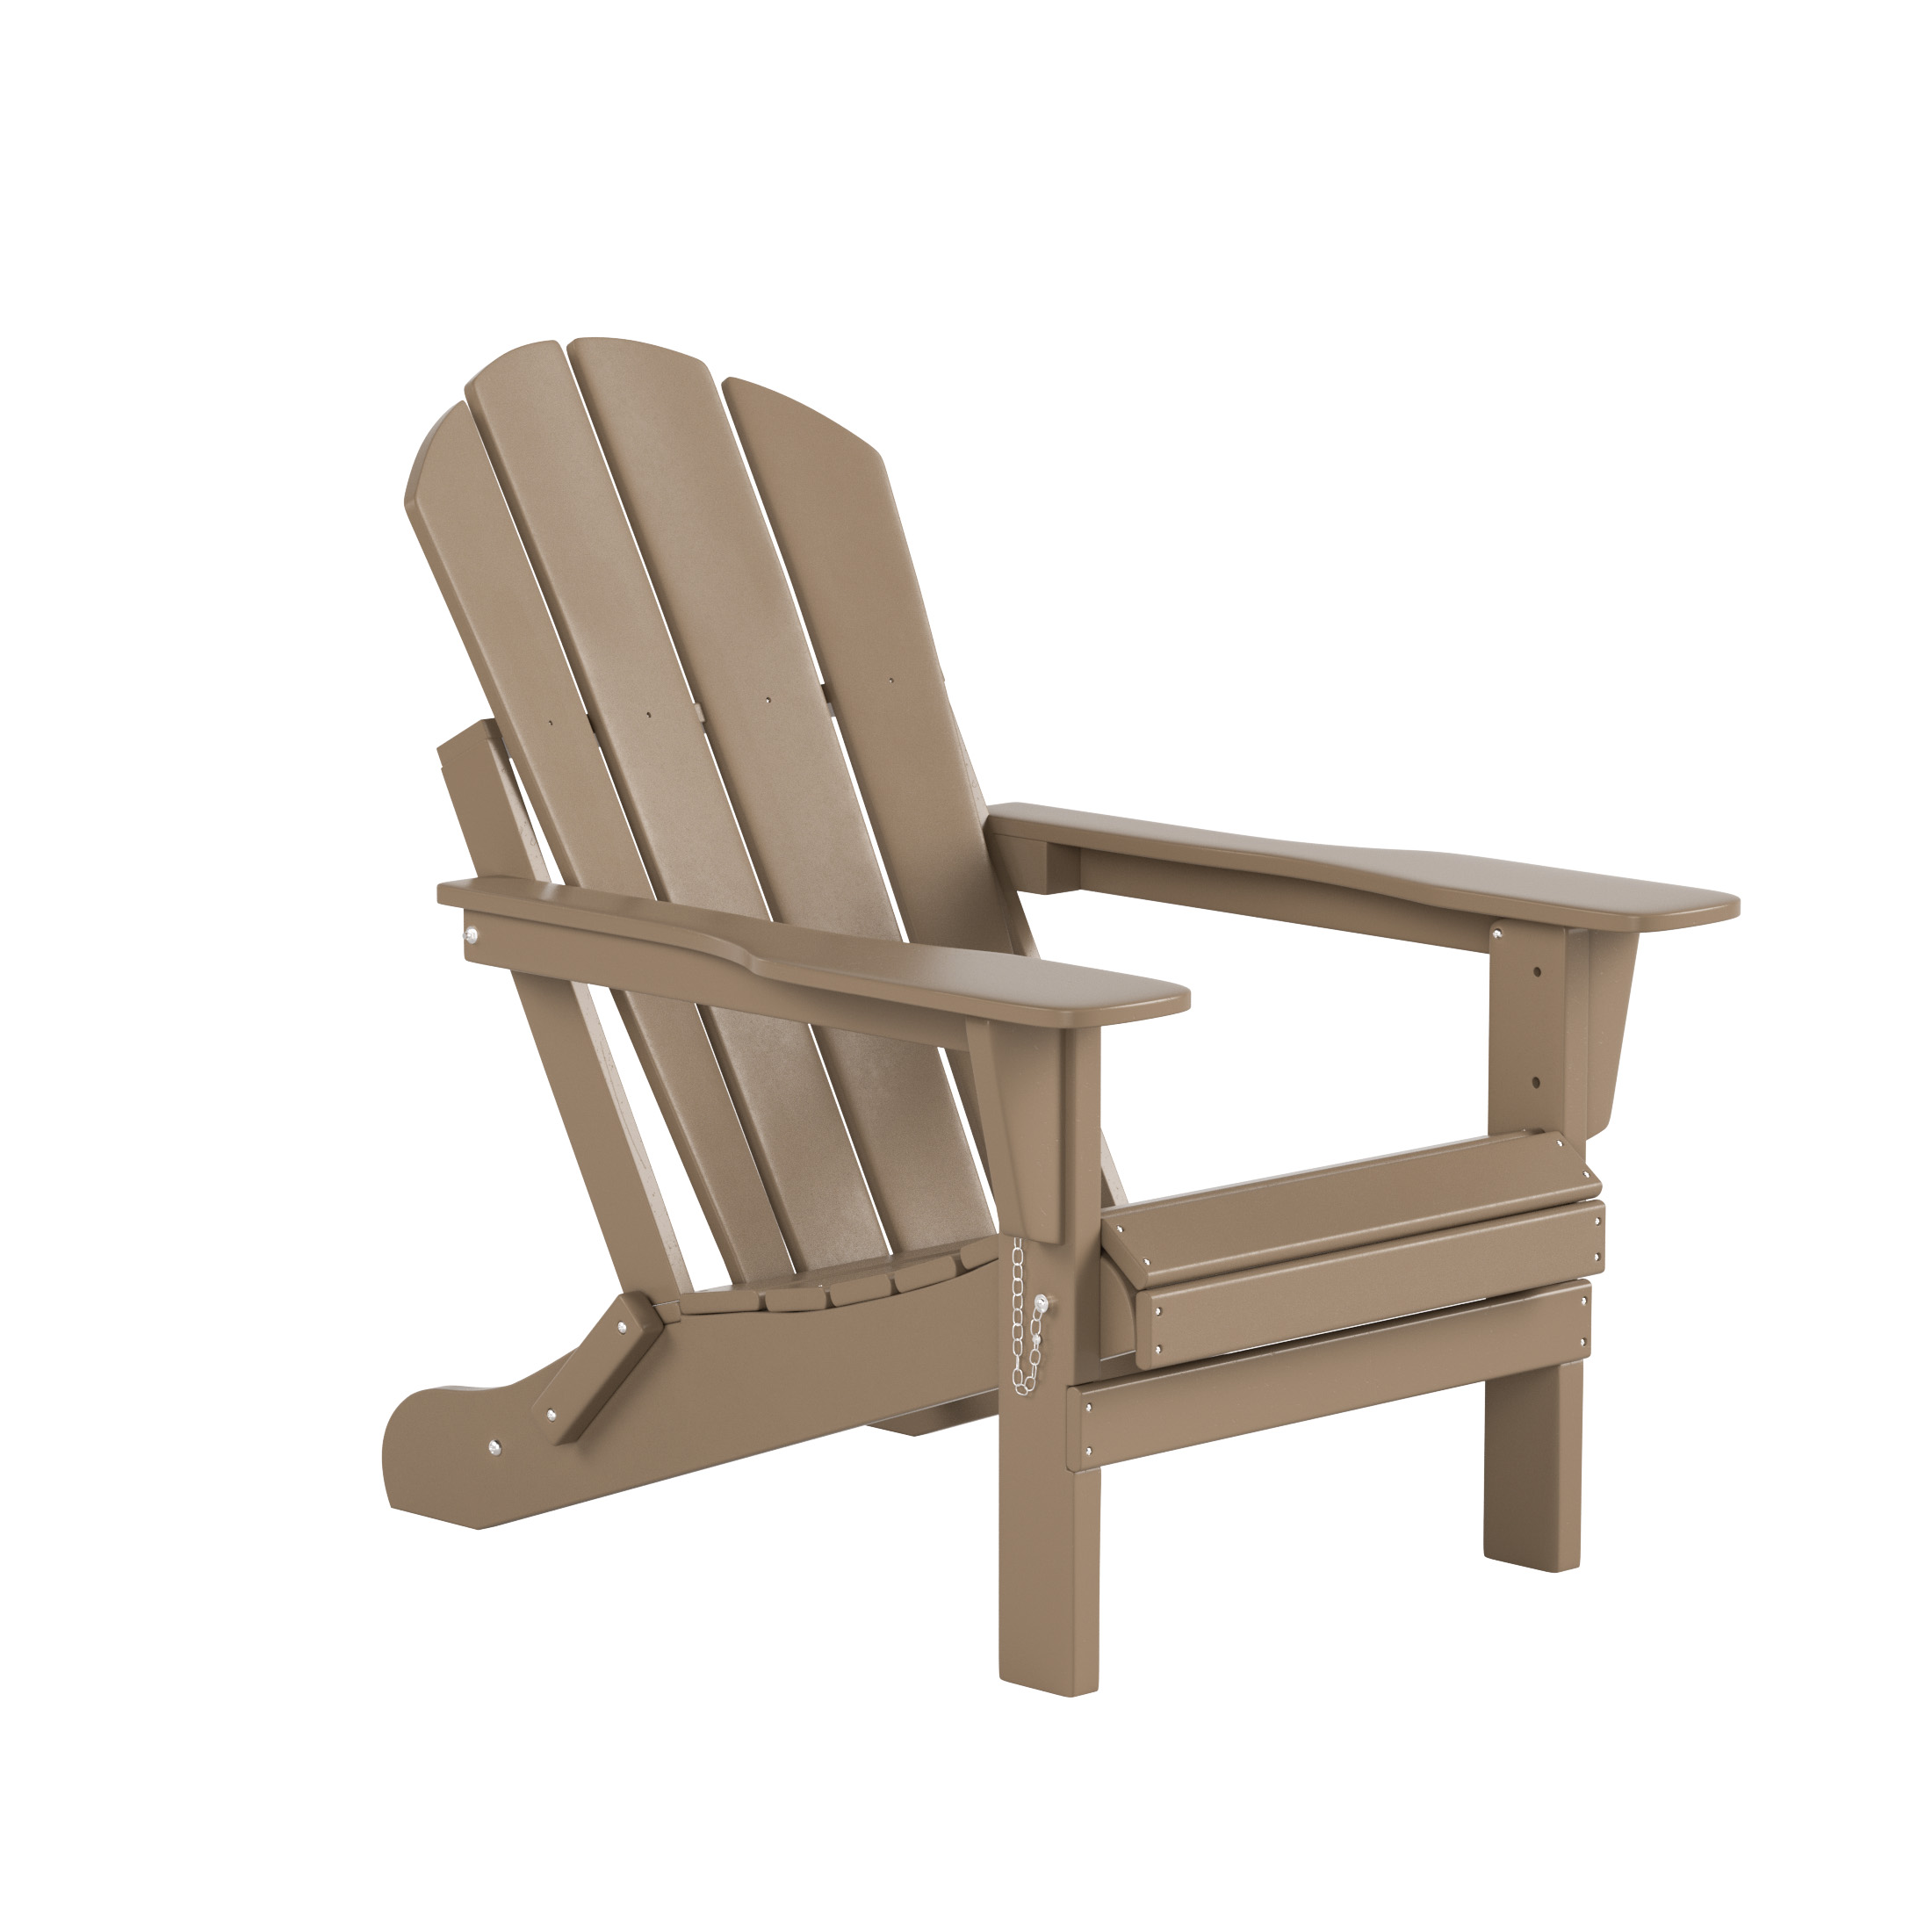 WestinTrends Malibu 2-Pieces Adirondack Chair Set with Side Table, All Weather Outdoor Seating Plastic Patio Lawn Chair Folding for Outside Porch Deck Backyard, Weathered Wood - image 5 of 7